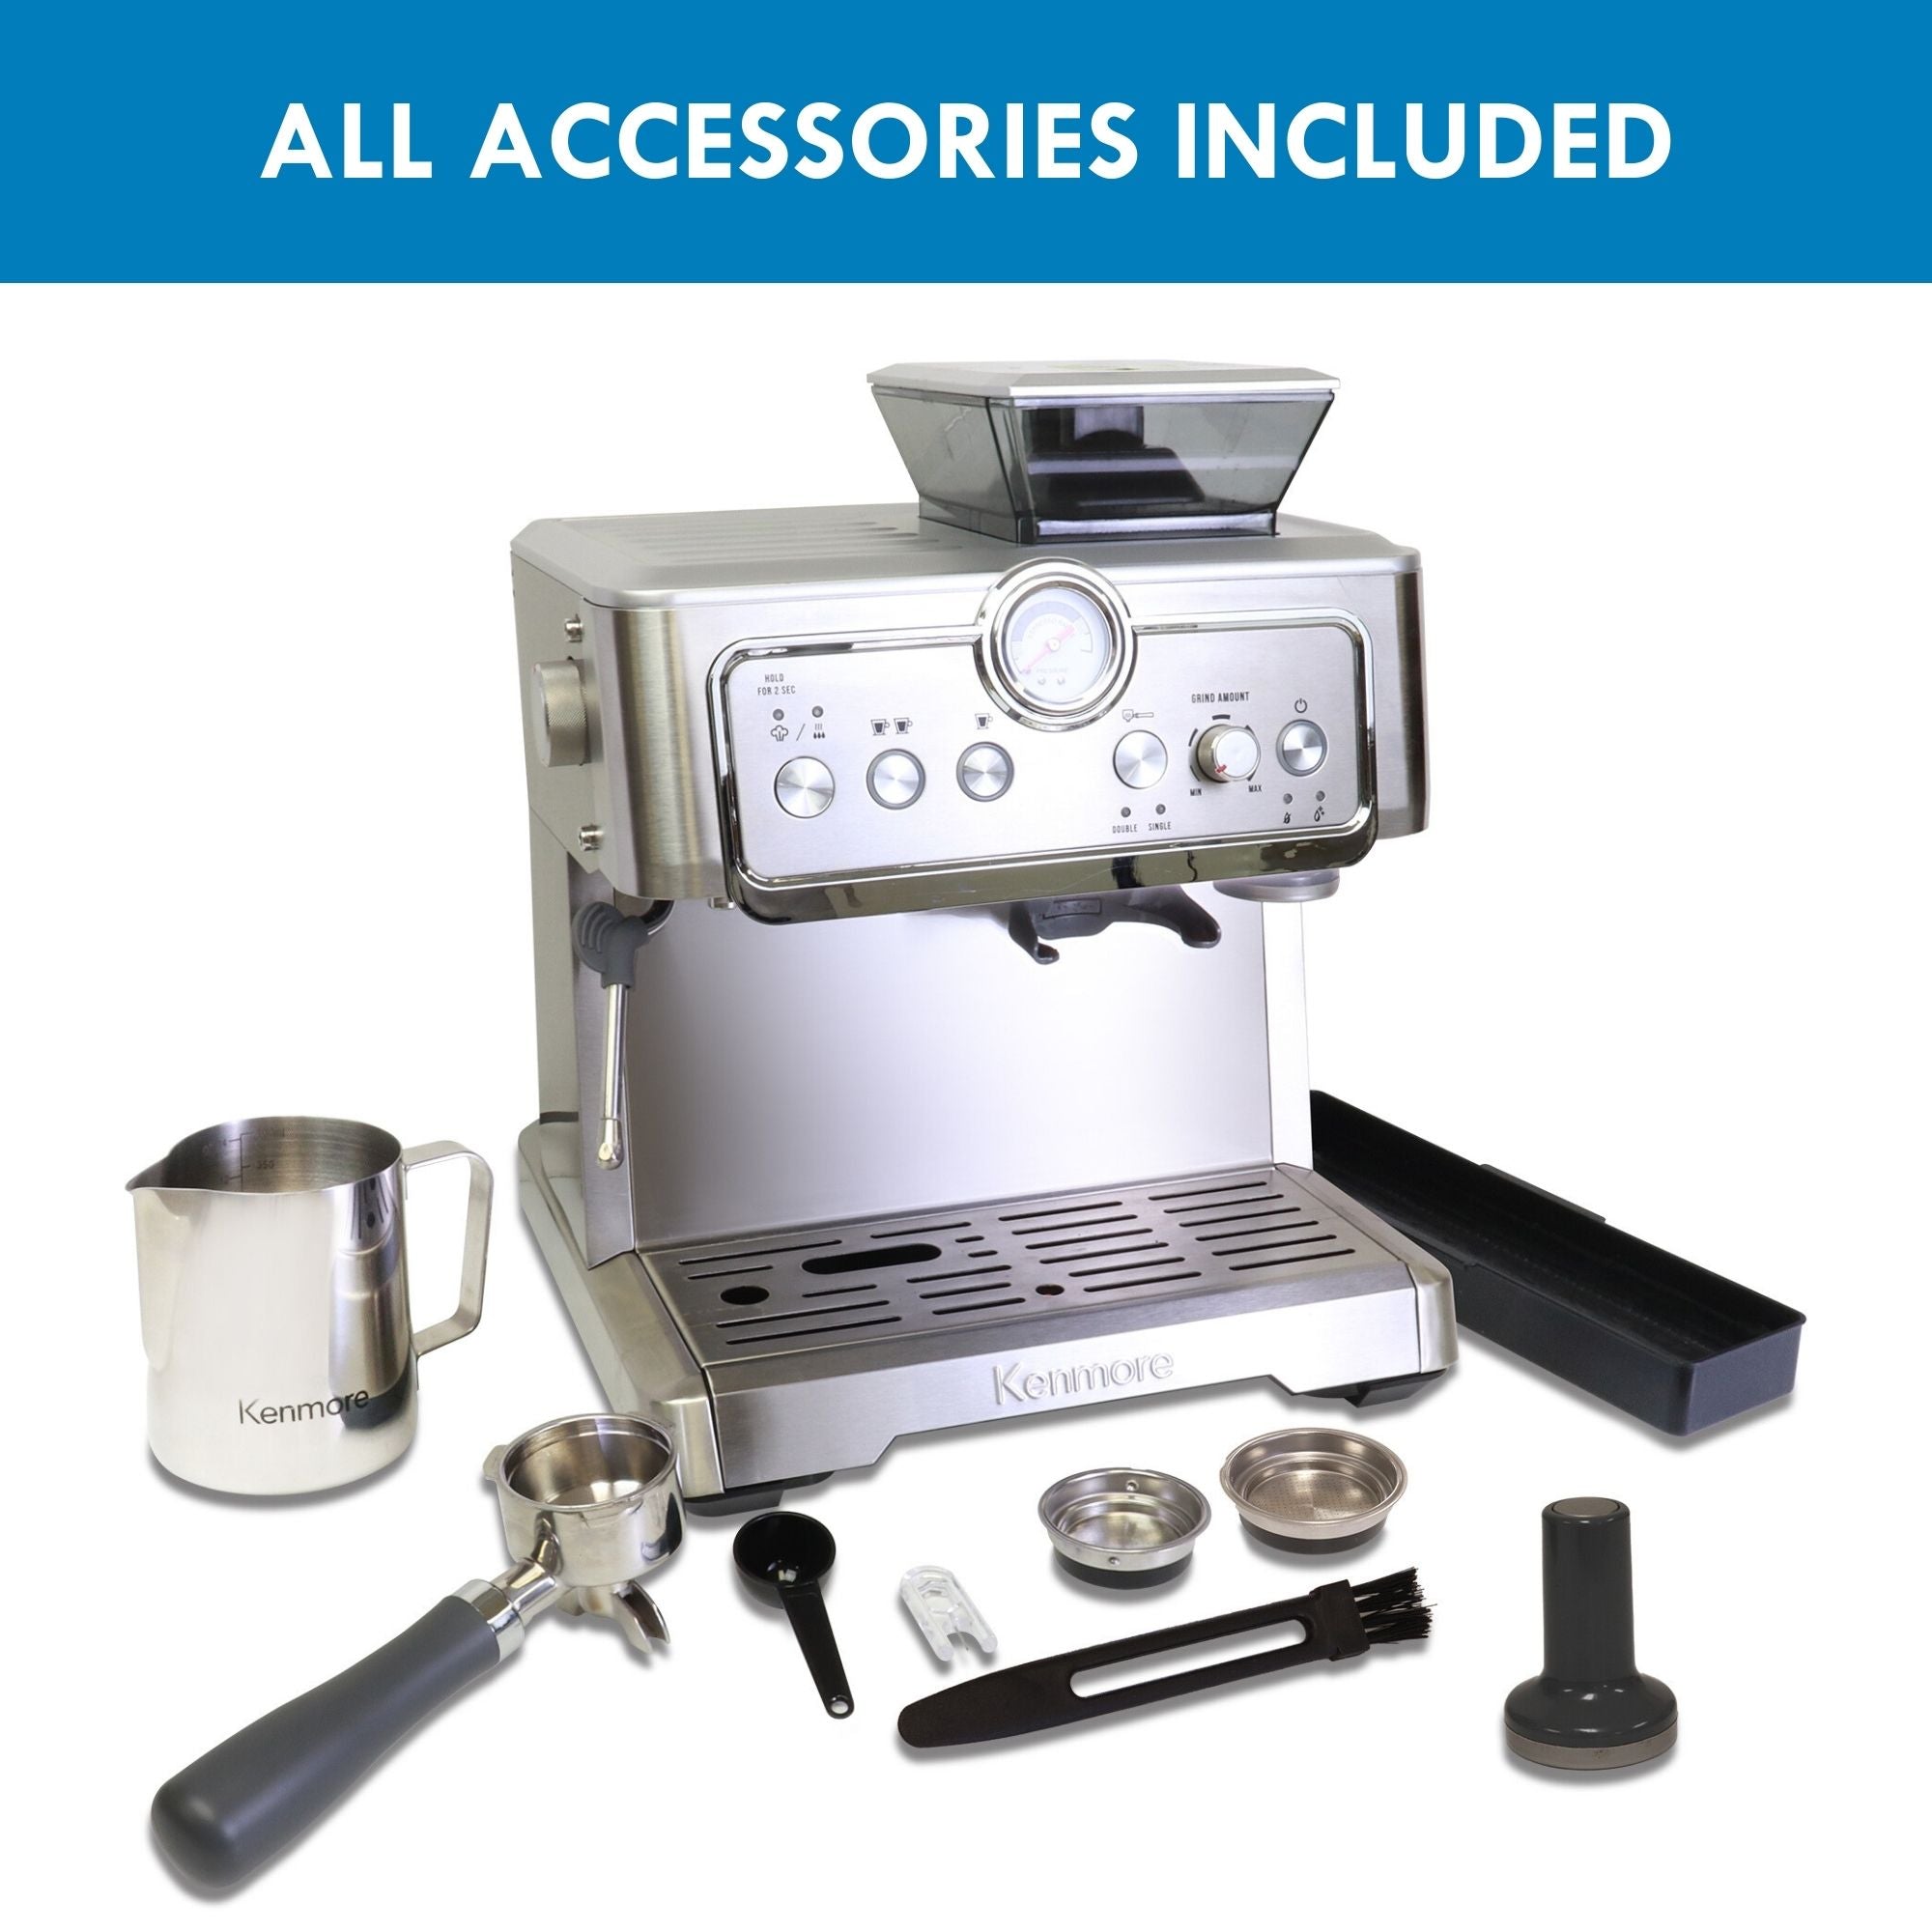 Kenmore semi-automatic espresso maker and all included accessories (milk frothing jug, portafilter, coffee scoop, steam nozzle cleaning pin, cleaning brush, 1- and 2-cup double-wall filter baskets, tamper, and accessory tray) on a white background. Text above reads, "All accessories included."